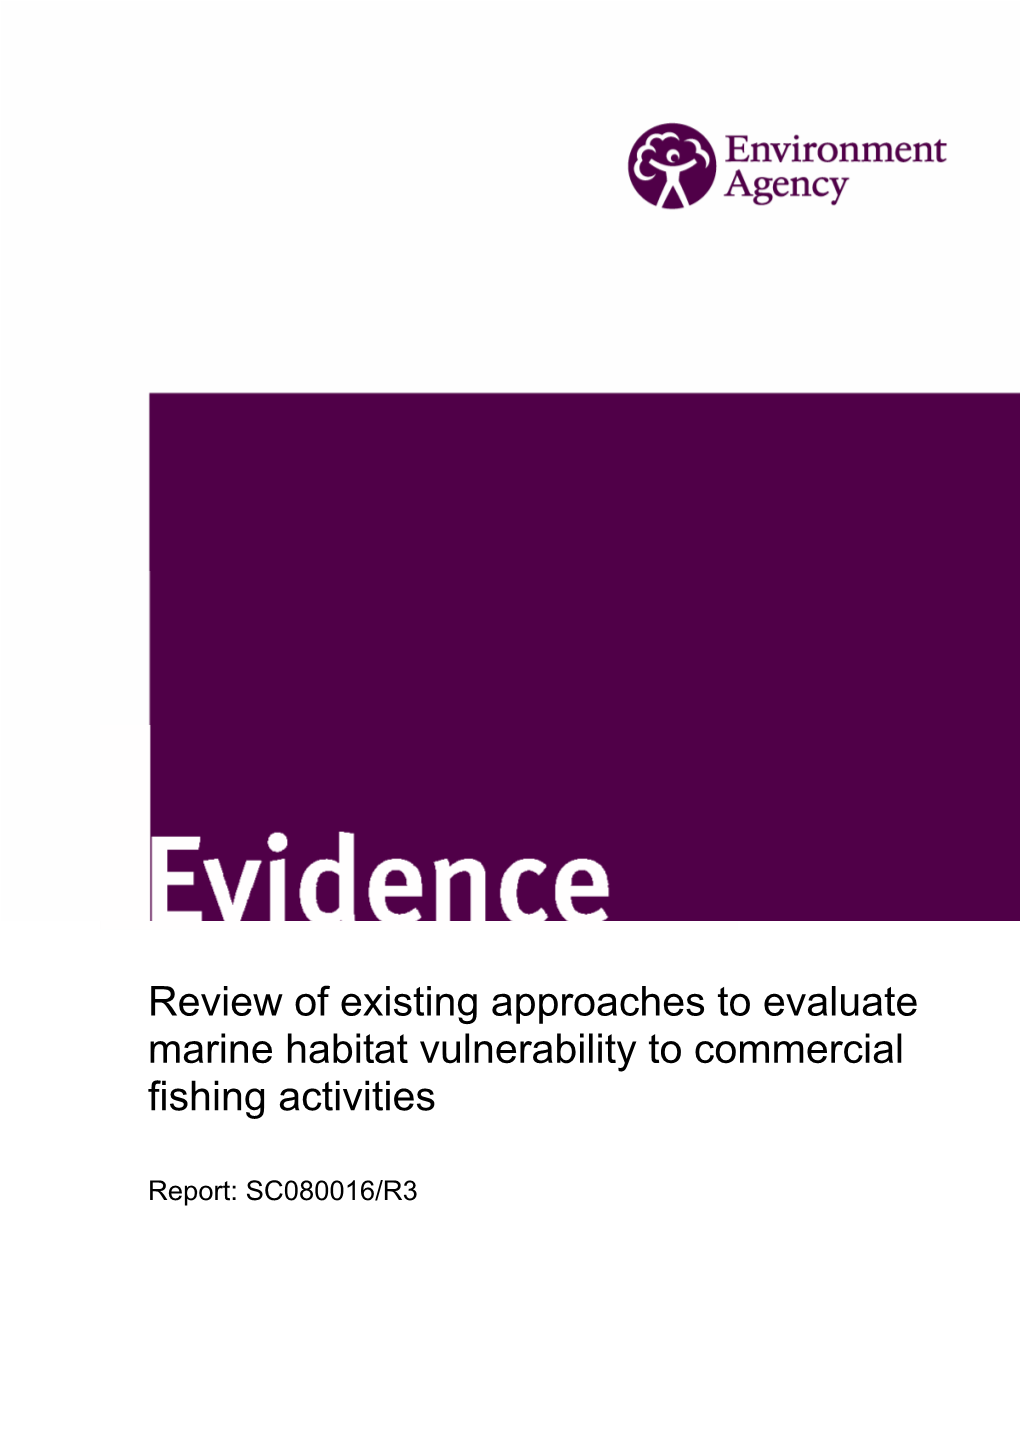 Review of Existing Approaches to Evaluate Marine Habitat Vulnerability to Commercial Fishing Activities